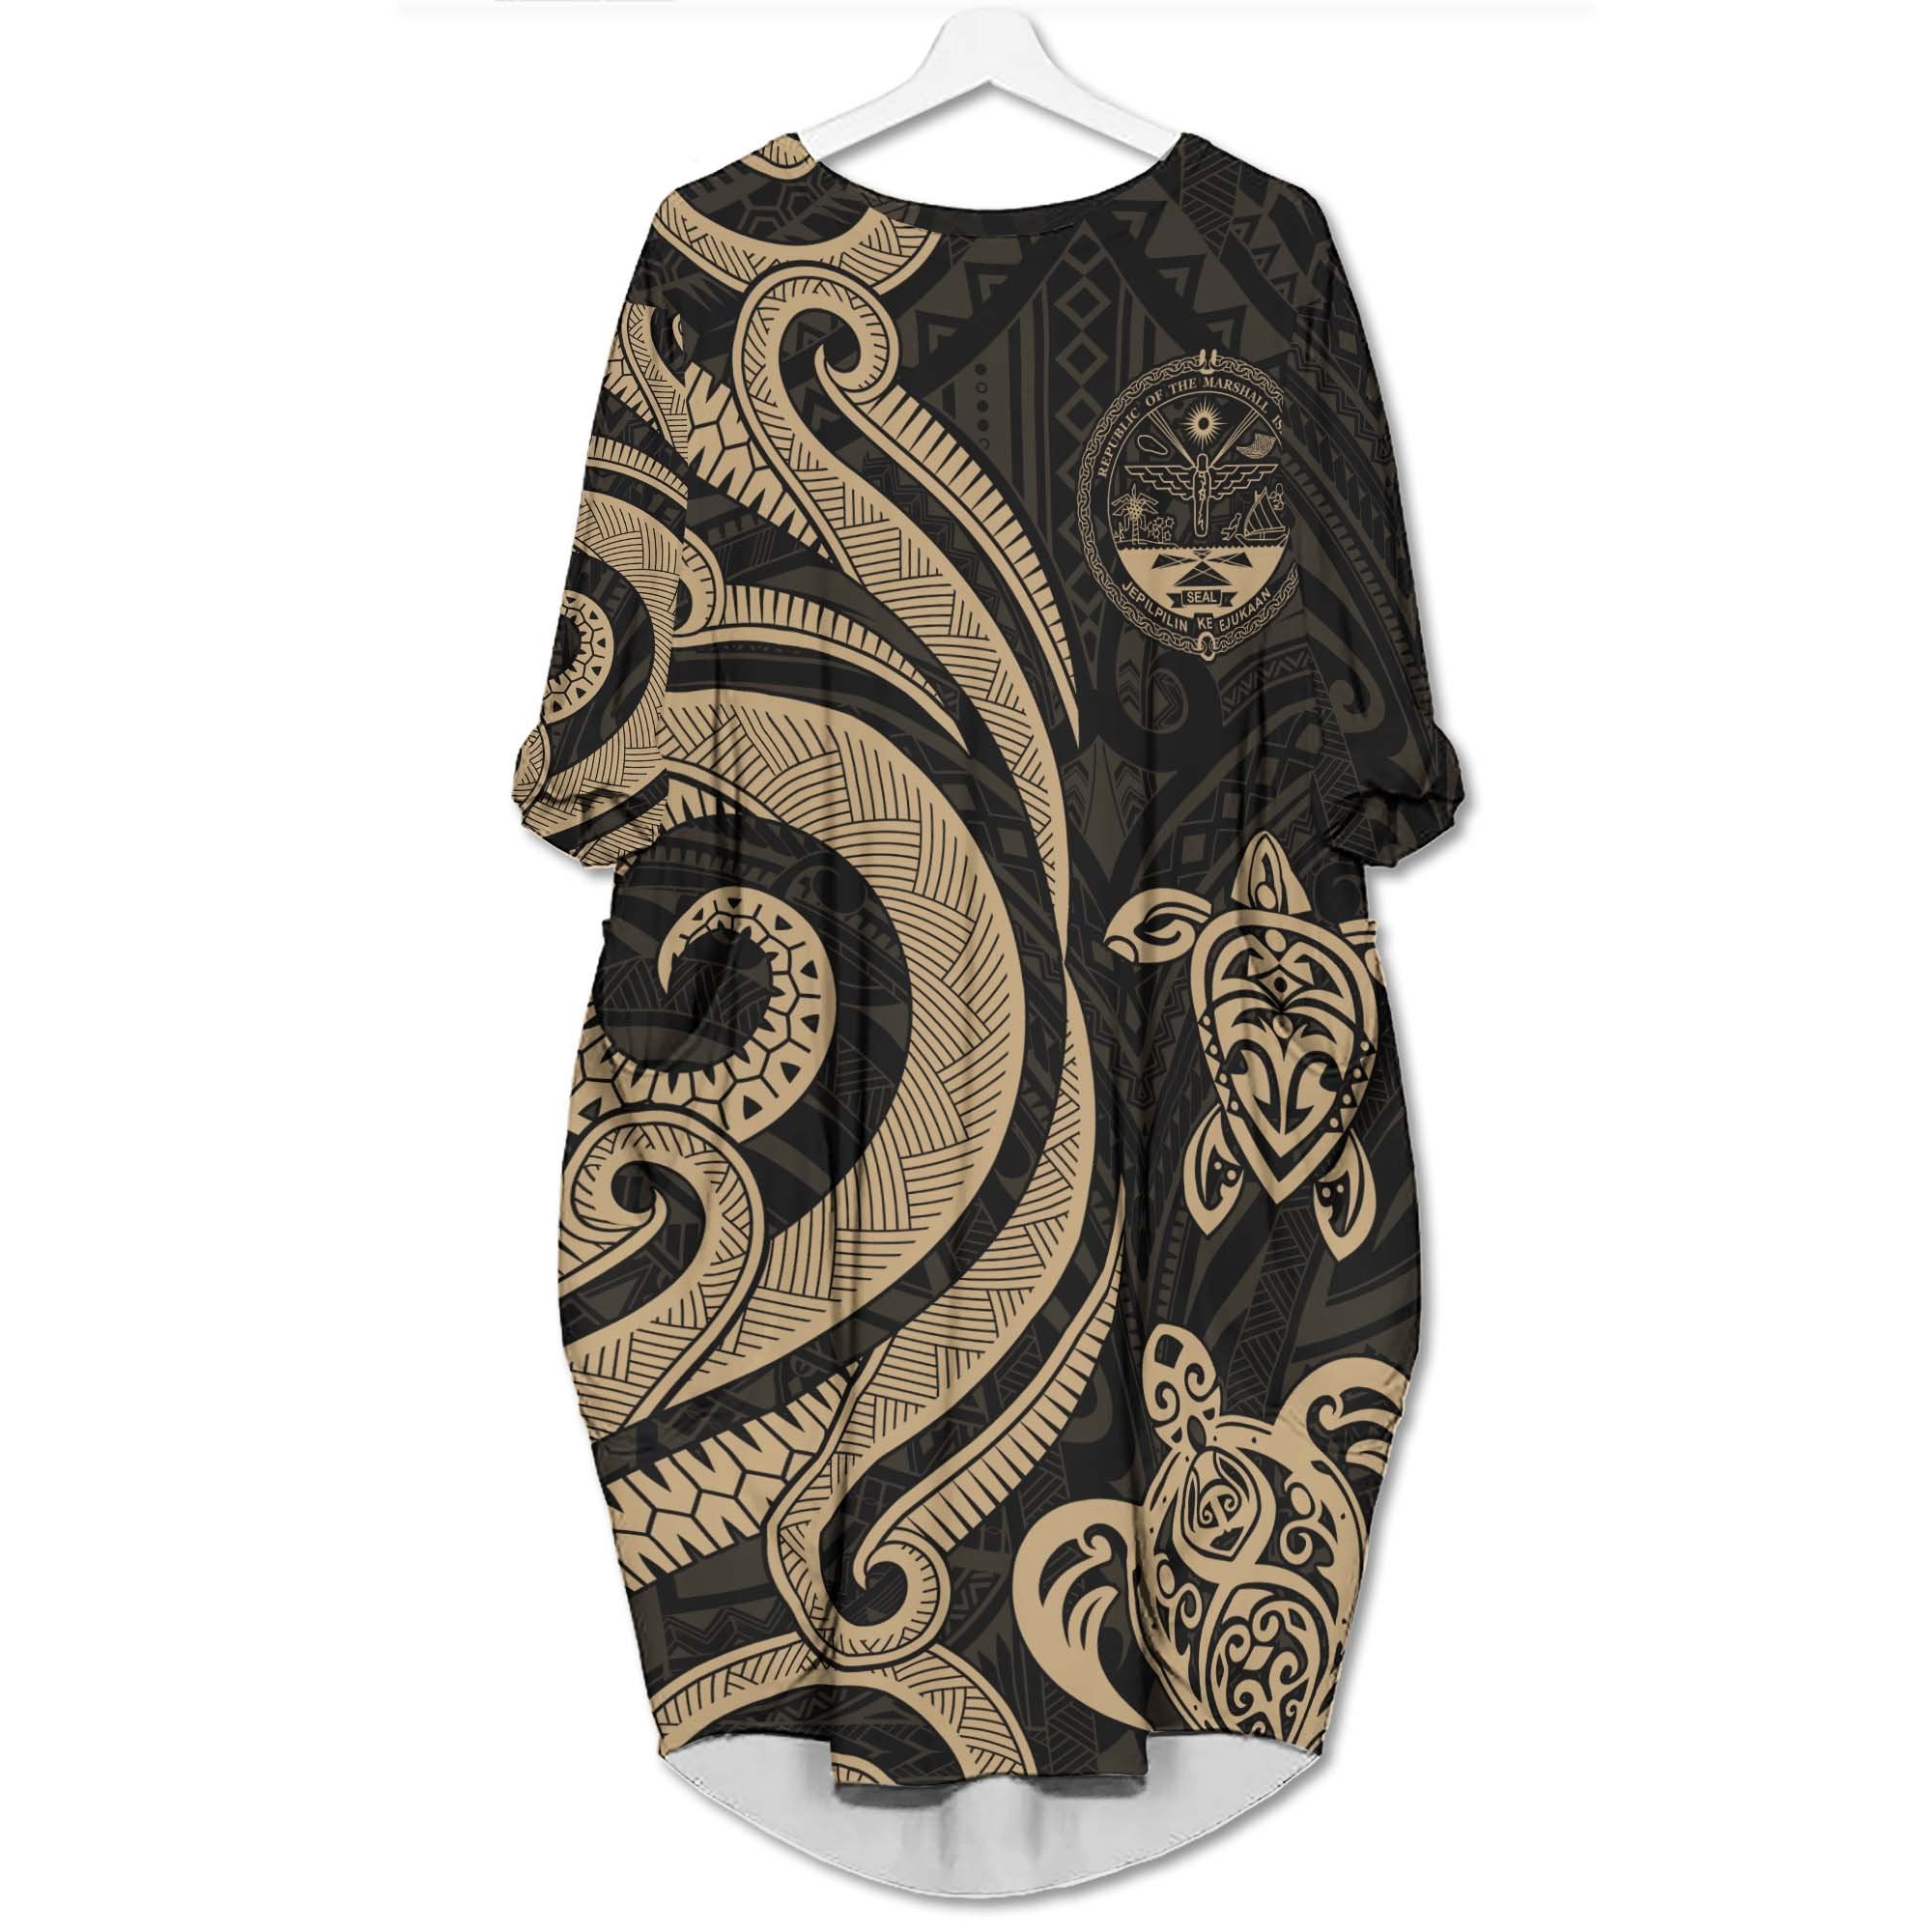 Marshall Islands Batwing Pocket Dress - Gold Tentacle Turtle Crest Women Gold - Polynesian Pride